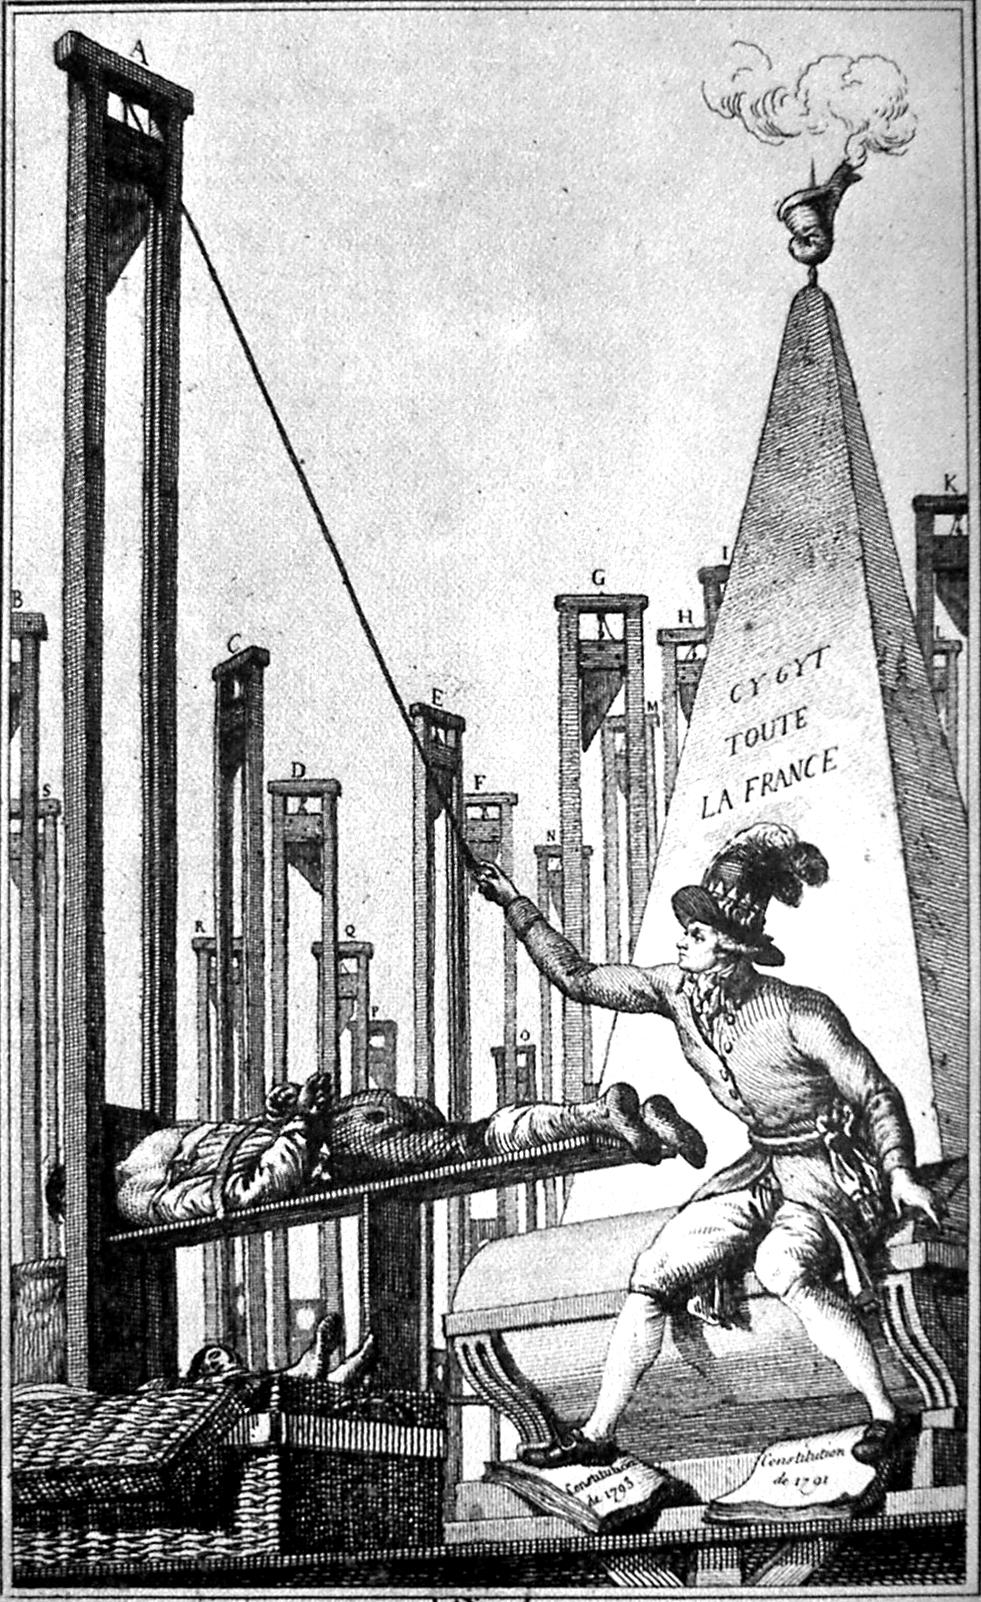 N E W Y O R K S T A T E S O C I A L S T U D I E S R E S O U R C E T O O L K I T Supporting Question 3 Featured Source A Source A: Unknown artist, engraving of Robespierre and the guillotine,